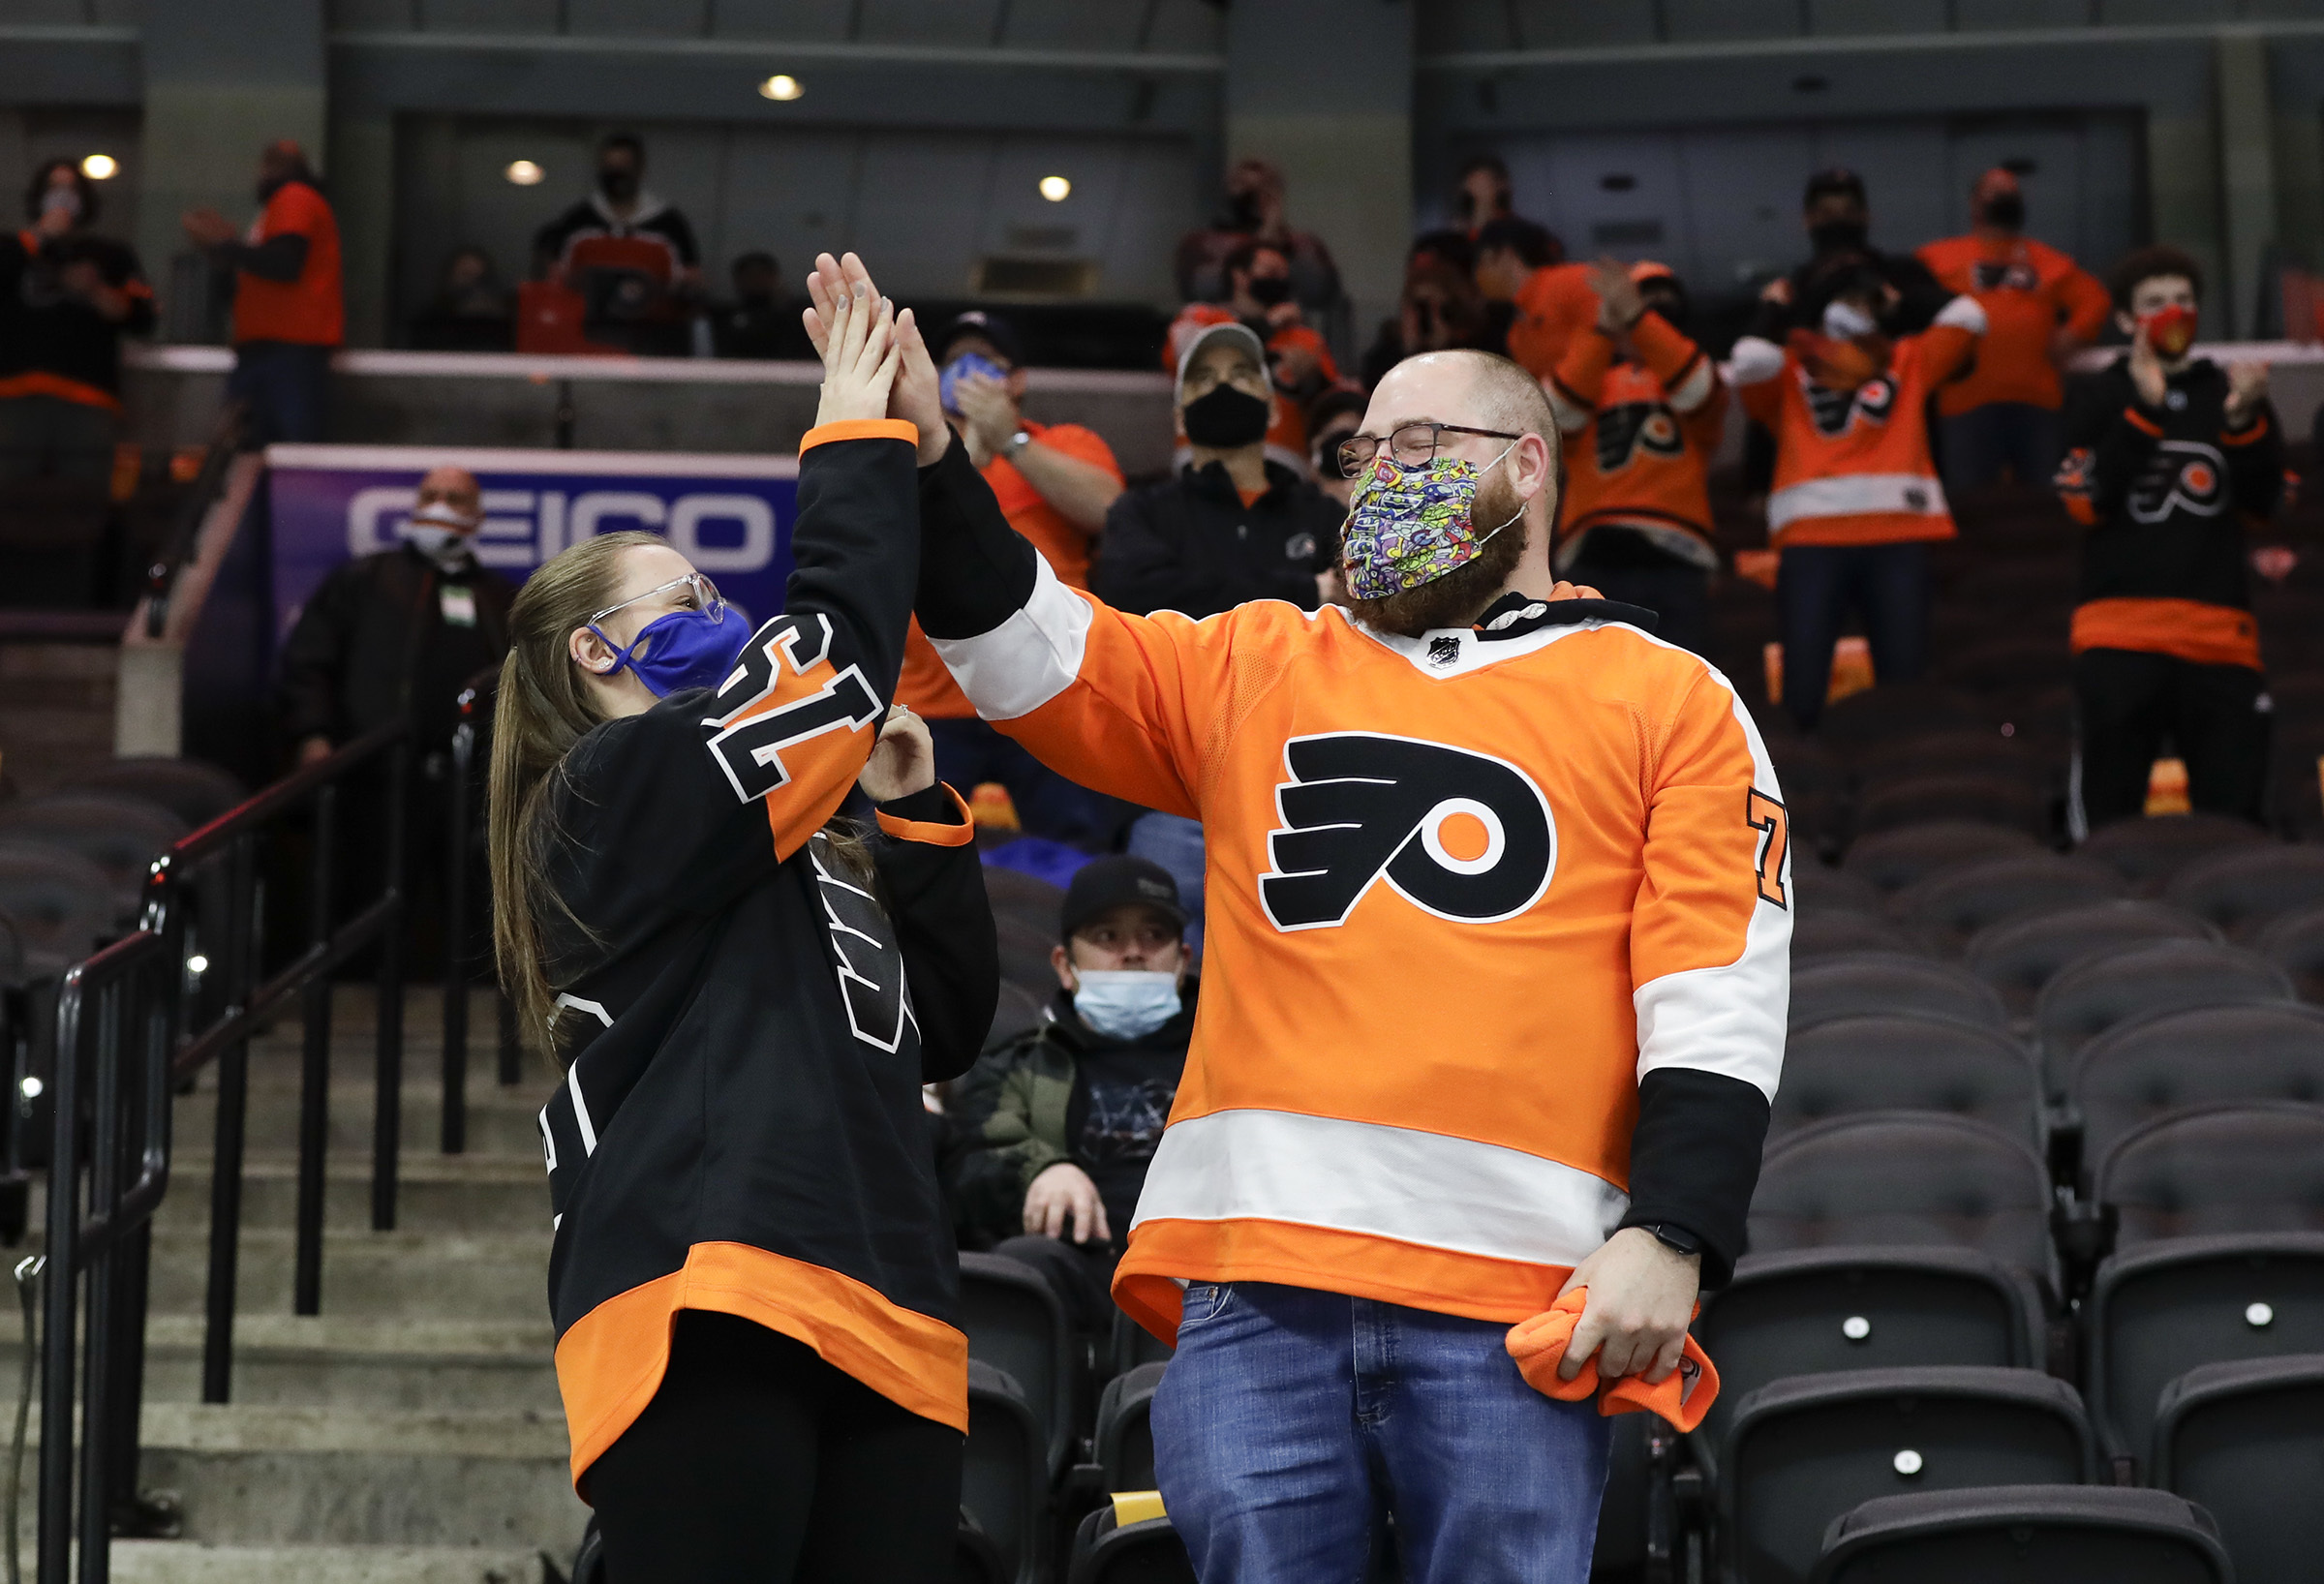 Flyers Fans Confused By BetRivers Sports Betting Lounges At Wells Fargo